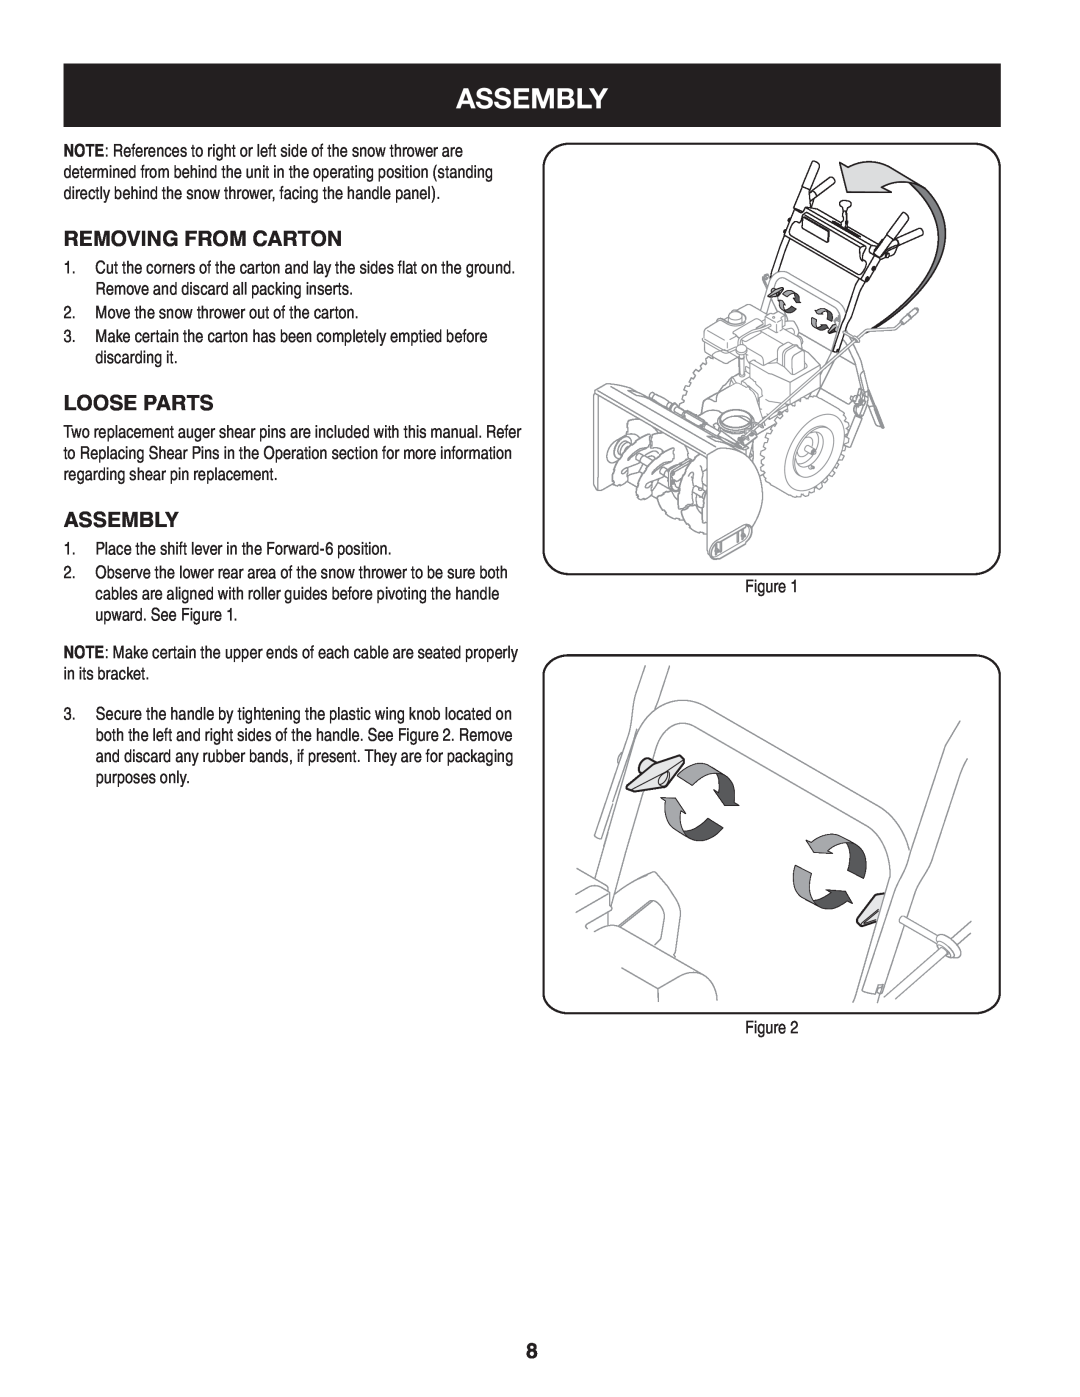 Craftsman 247.8819 operating instructions Assembly, Removing From Carton, Loose Parts, assembly 